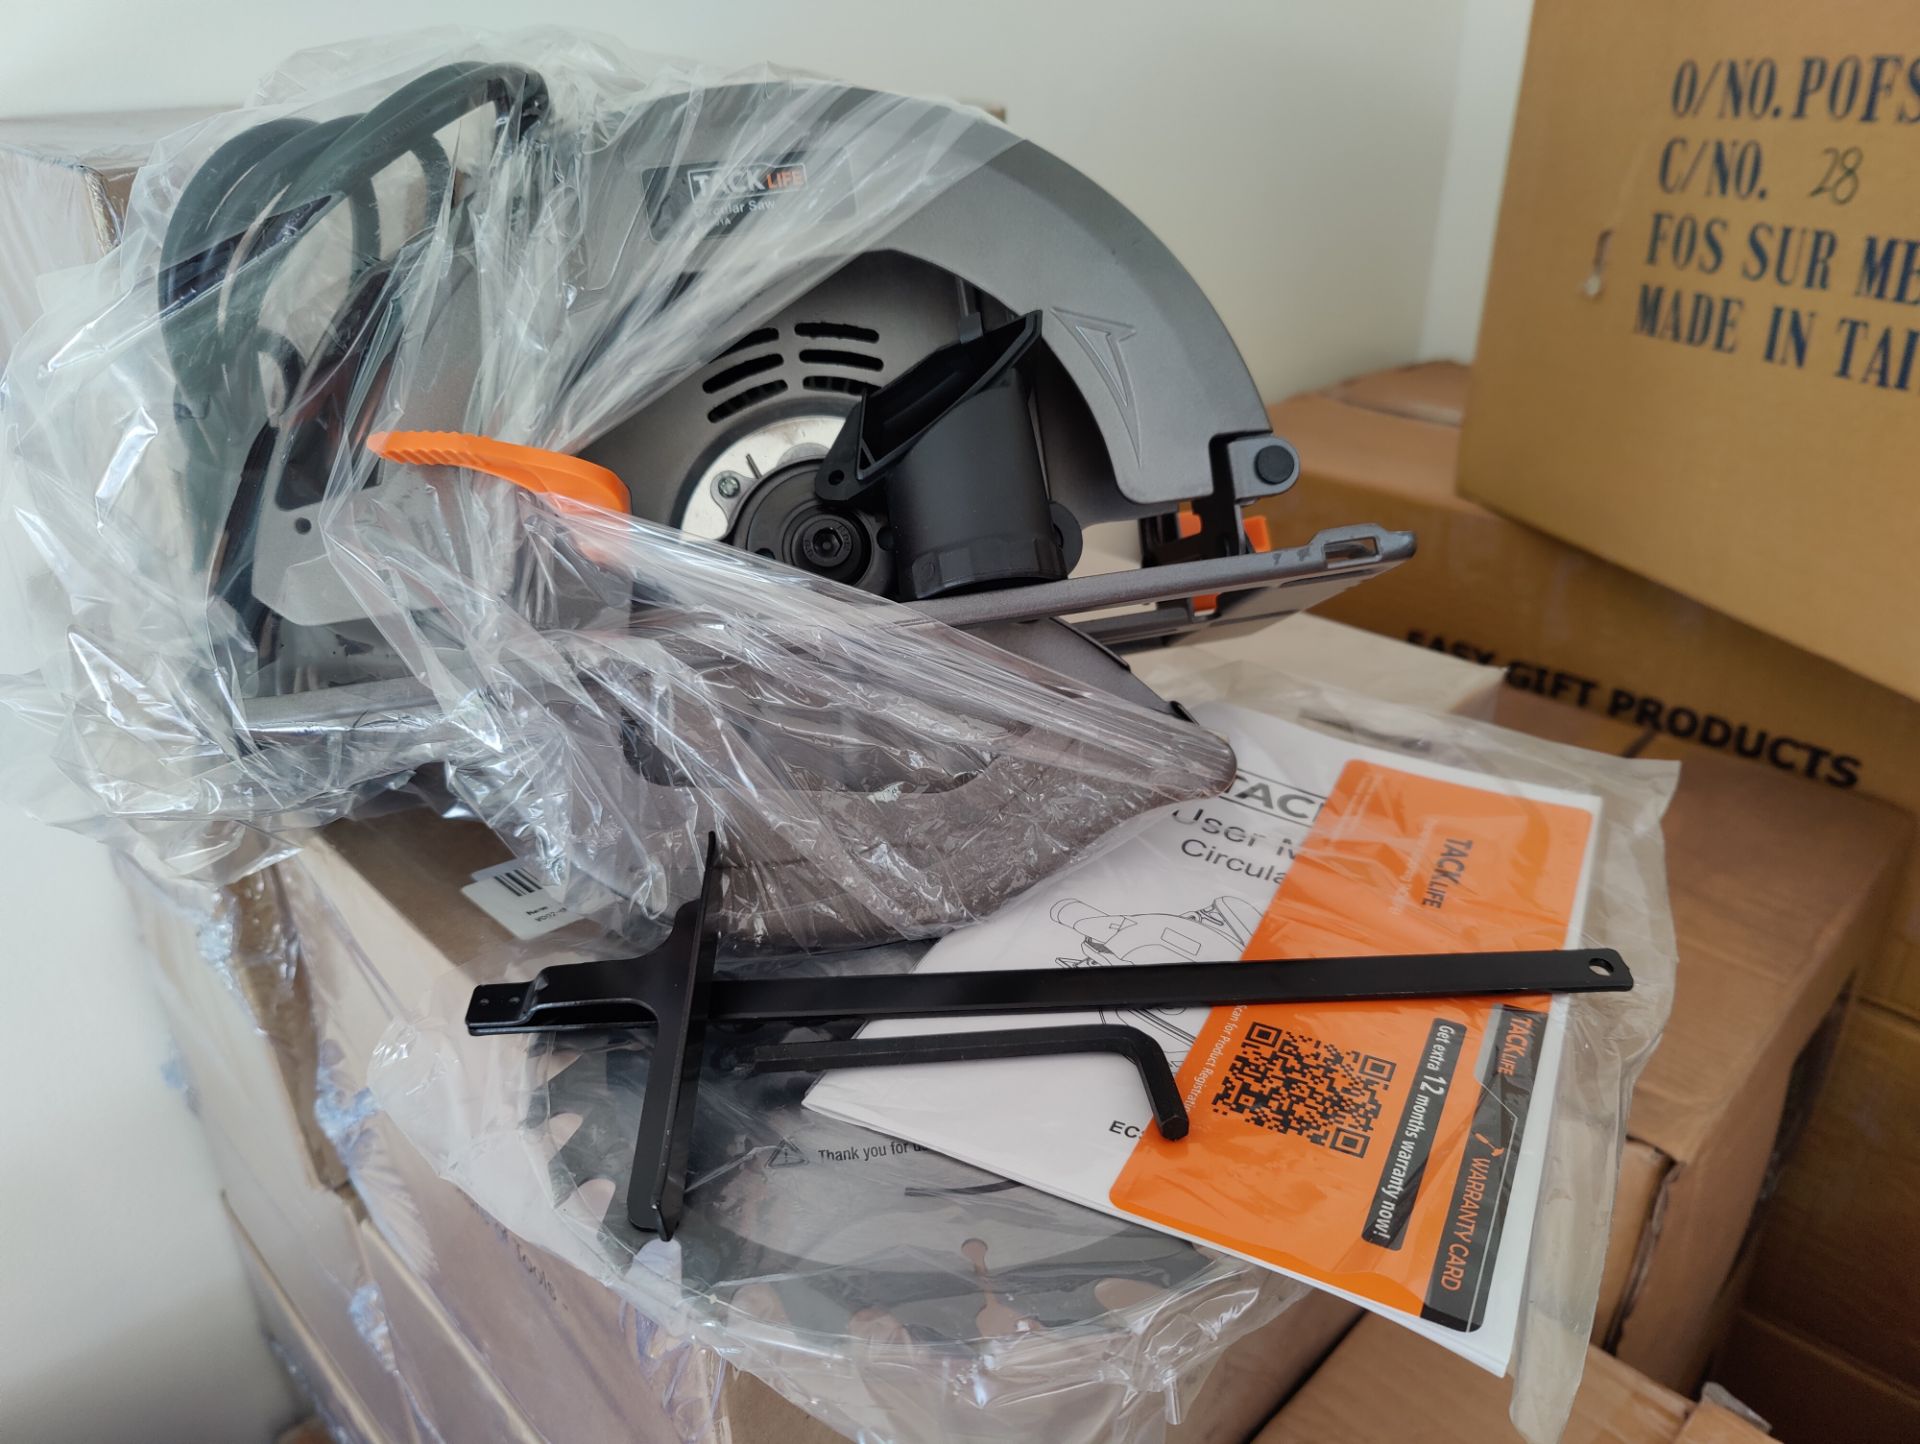 2 x Trade Lot New Boxed Tacklife Electric Circular Saw, 1500W, 5000 RPM With Bevel Cuts 2-3/5' - Image 2 of 4